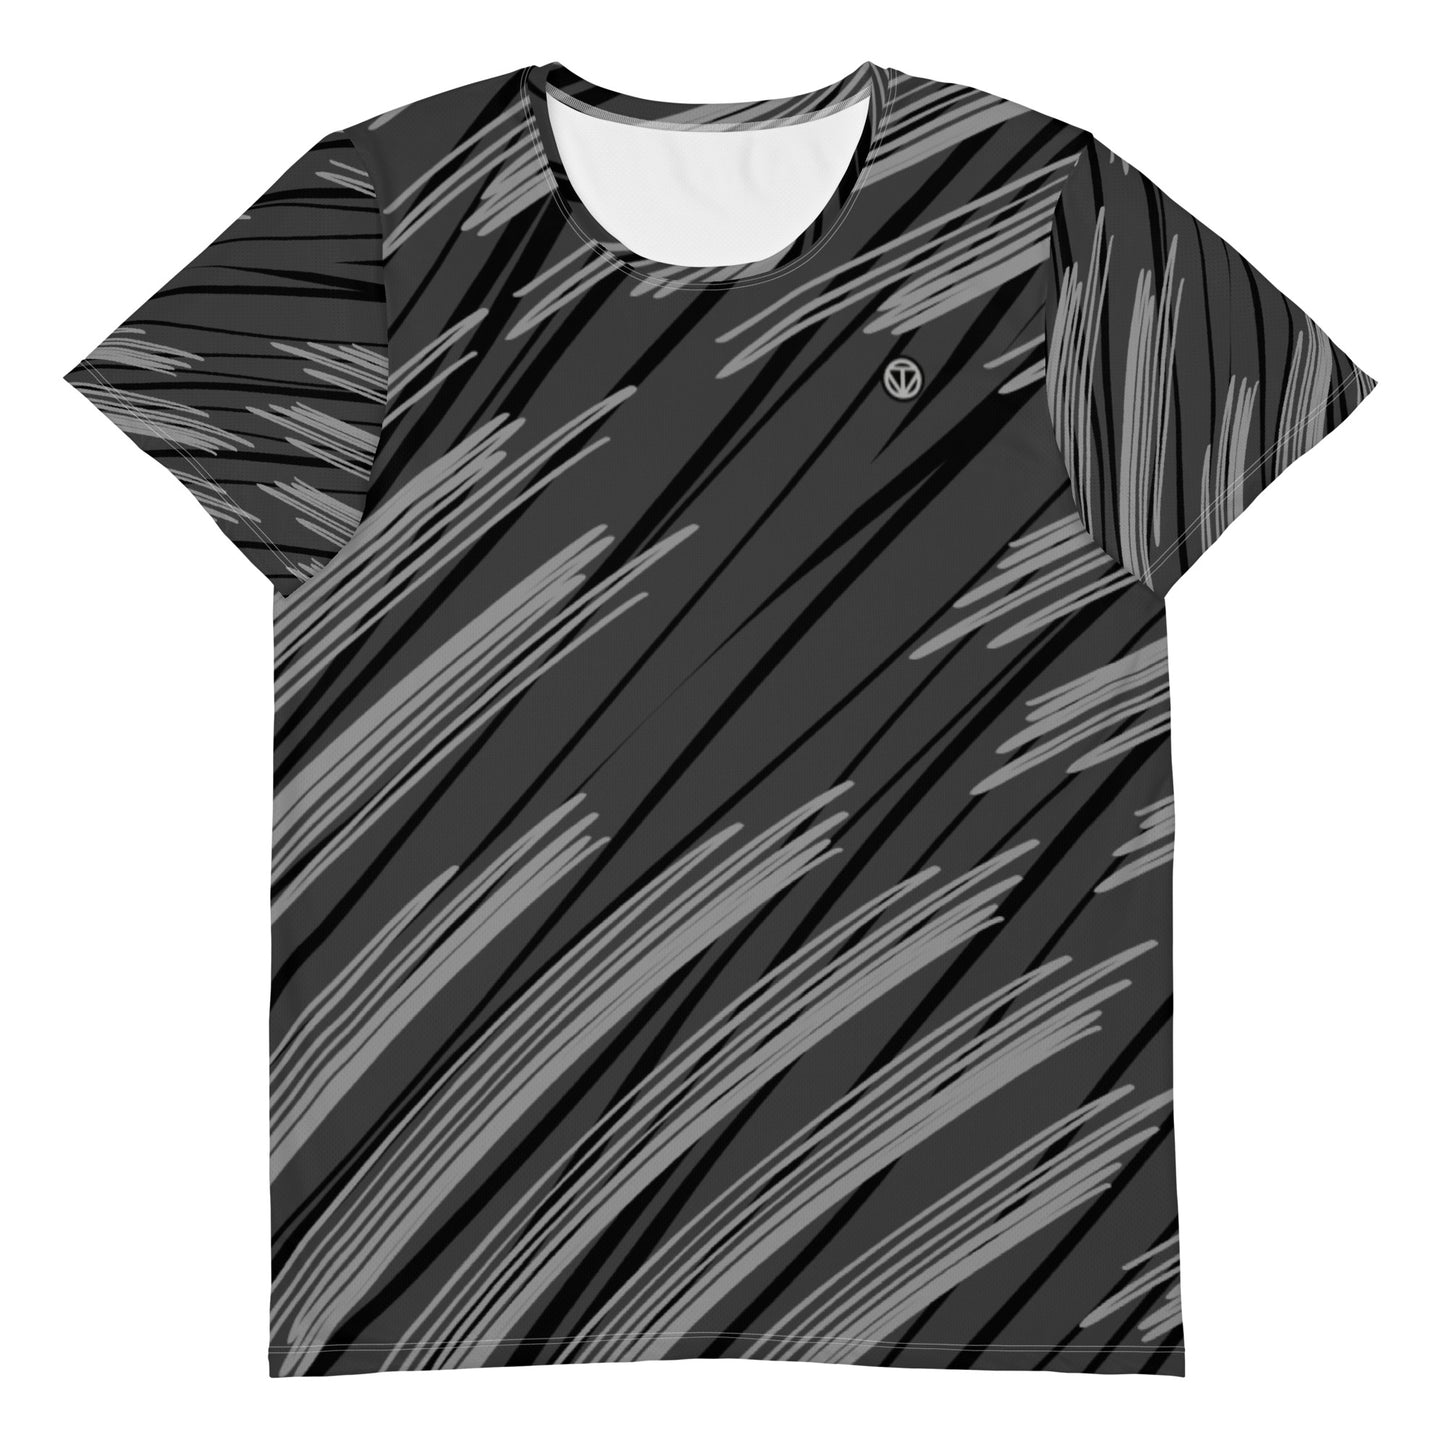 TIME OF VIBES - Men's Athletic T-shirt ABSTRACT - €45.00